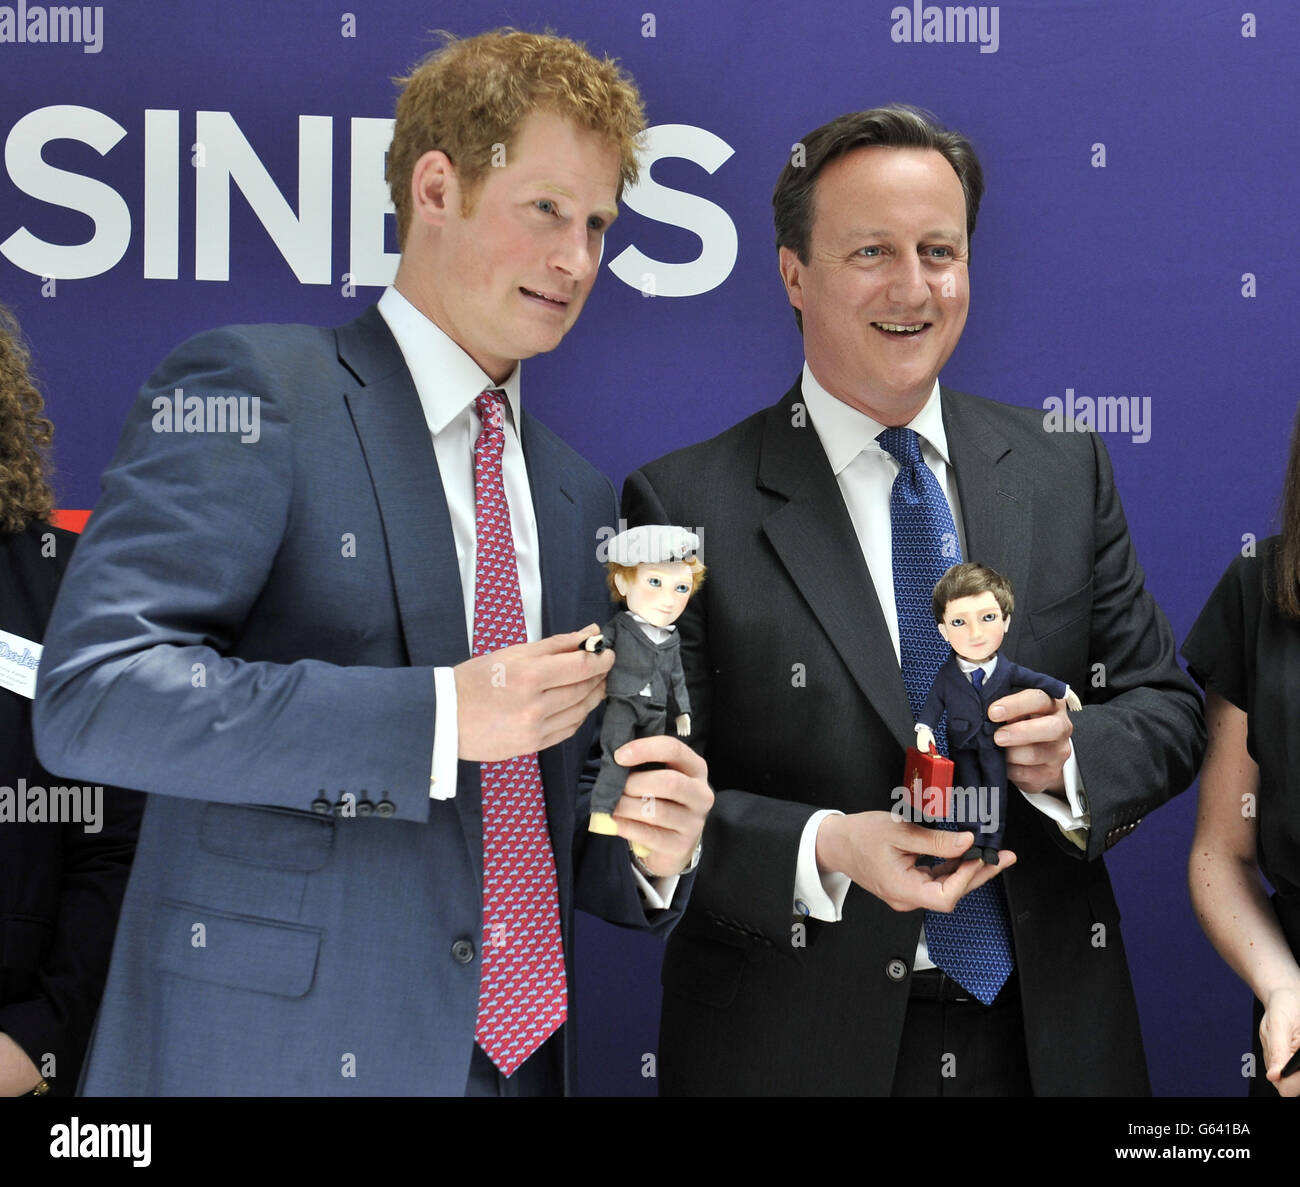 Prince Harry and David Cameron are presented with dolls by 'Makielab' company co-founder Jo Roach of themselves during part of a UK business campaign called 'GREAT' at the Milk Studios, Manhattan, New York. Stock Photo